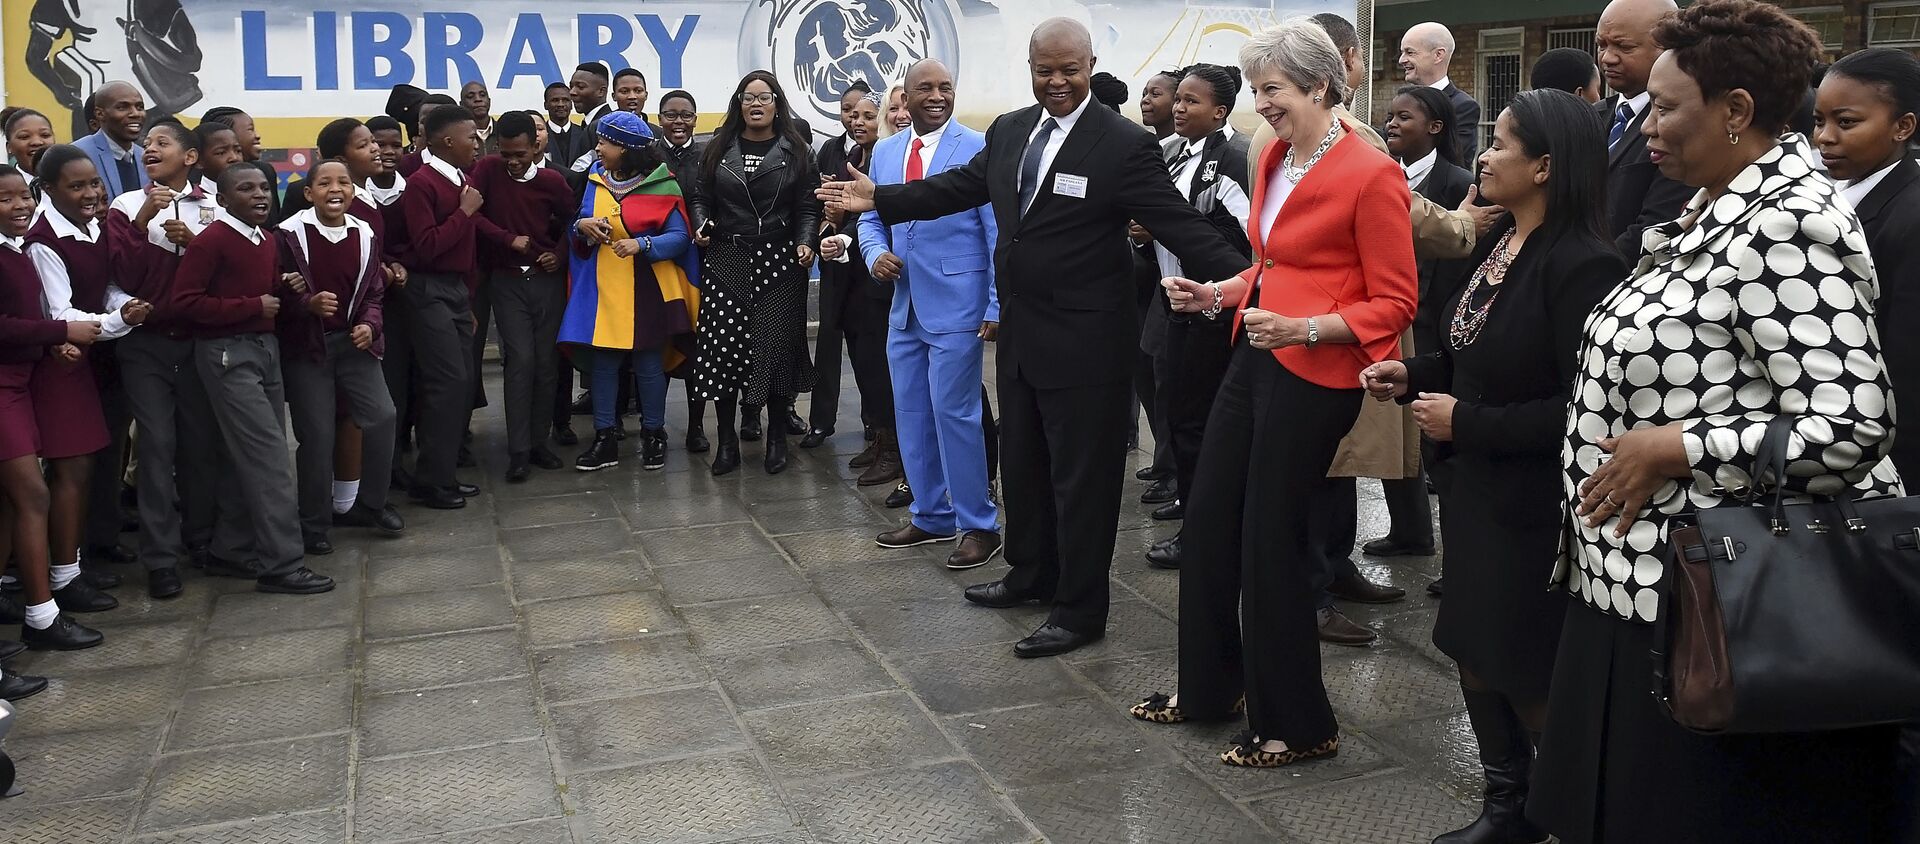 British Prime Minister Theresa May meets staff and pupils during a visit to the ID Mkhize High School in Gugulethu, Cape Town, South Africa, Tuesday, Aug. 28, 2018. Theresa May has started a three-nation visit to Africa where she is to meet South African President Cyril Ramaphosa - Sputnik International, 1920, 28.08.2018